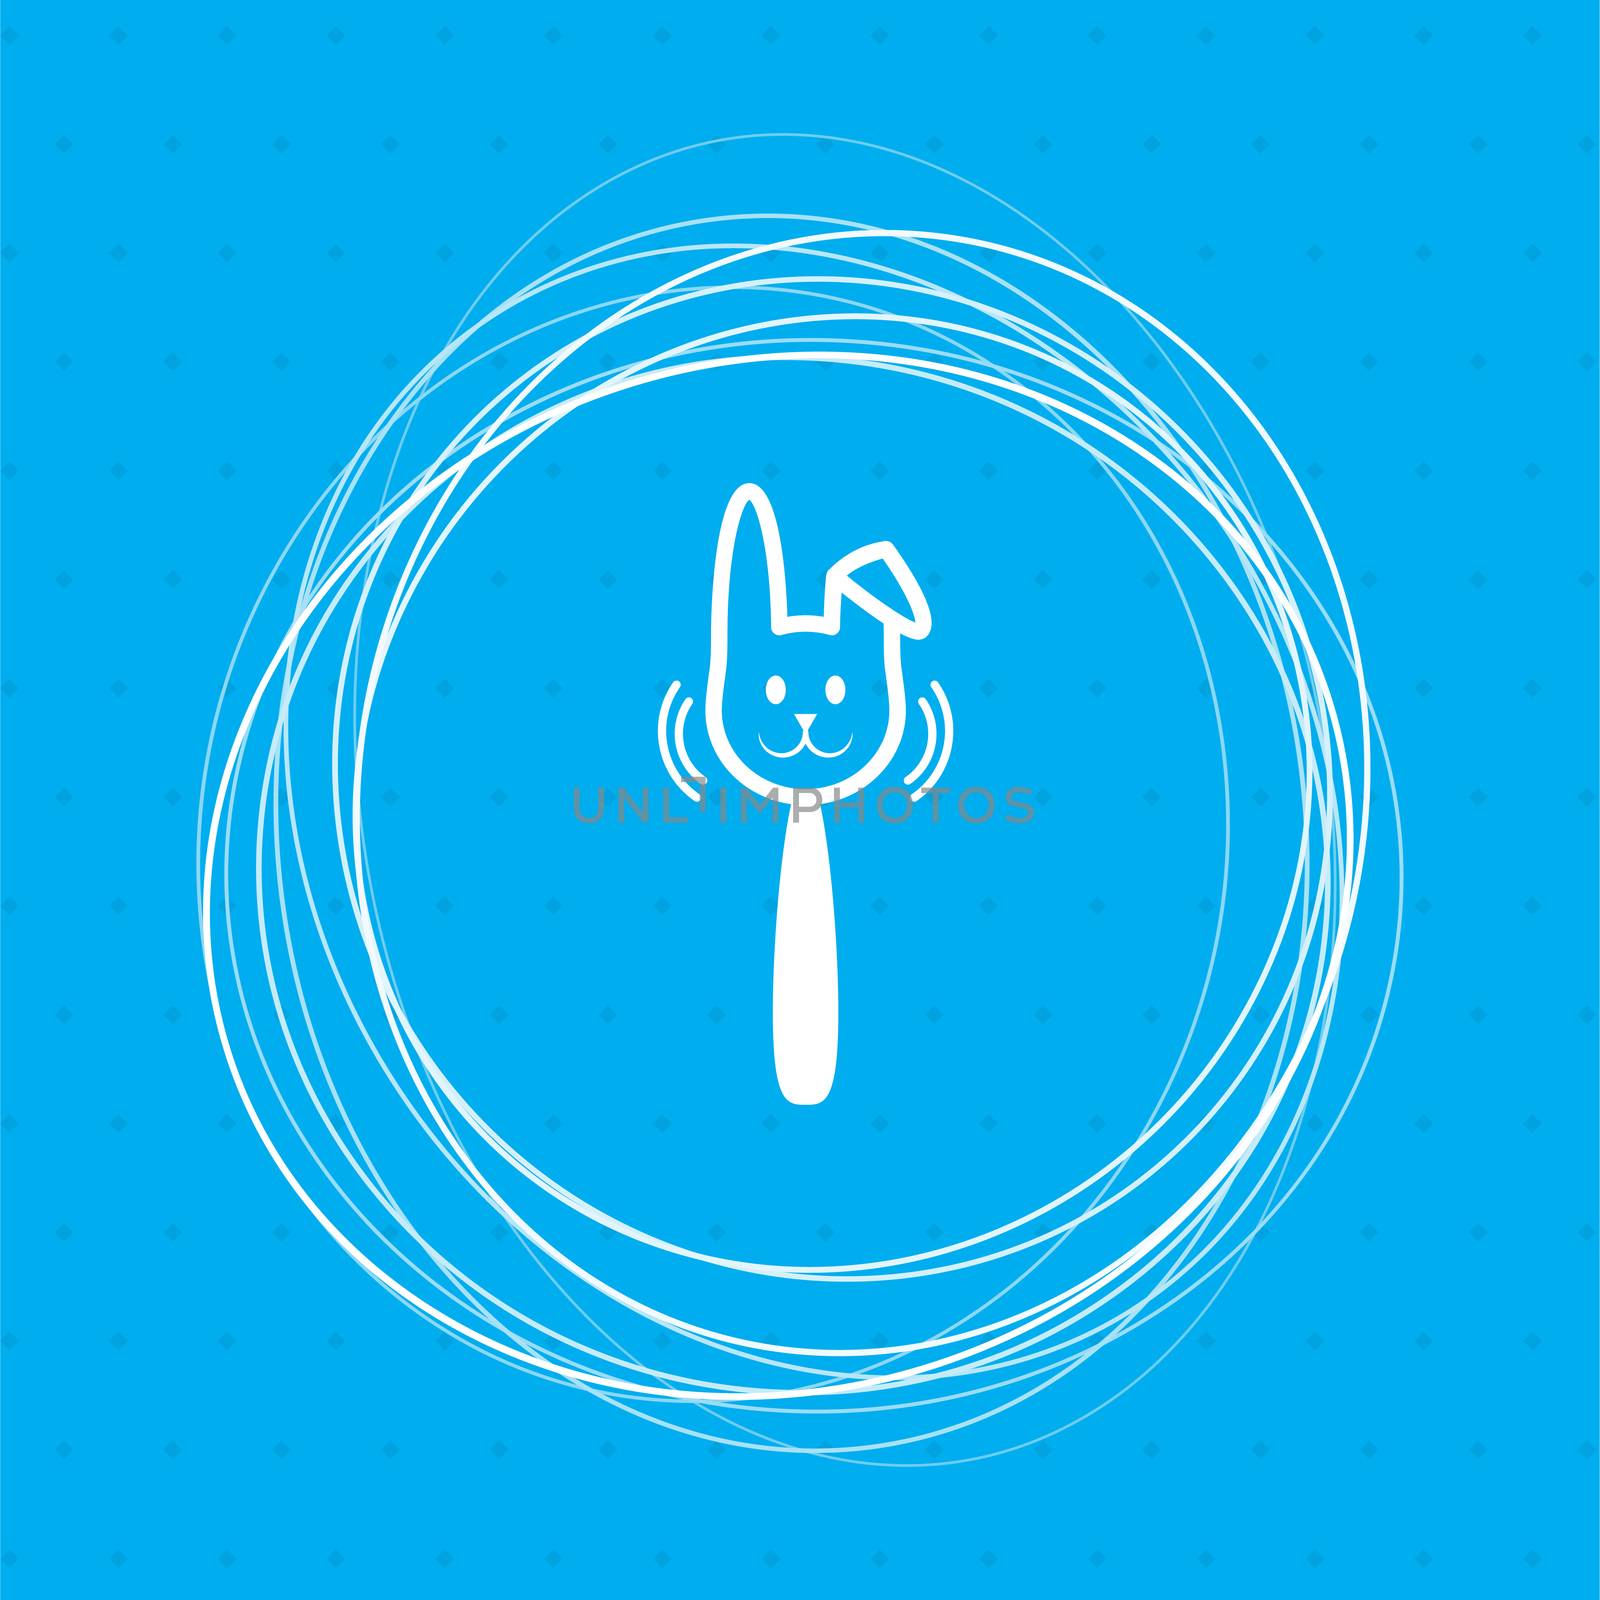 easter rabbit icon on a blue background with abstract circles around and place for your text.  by Adamchuk